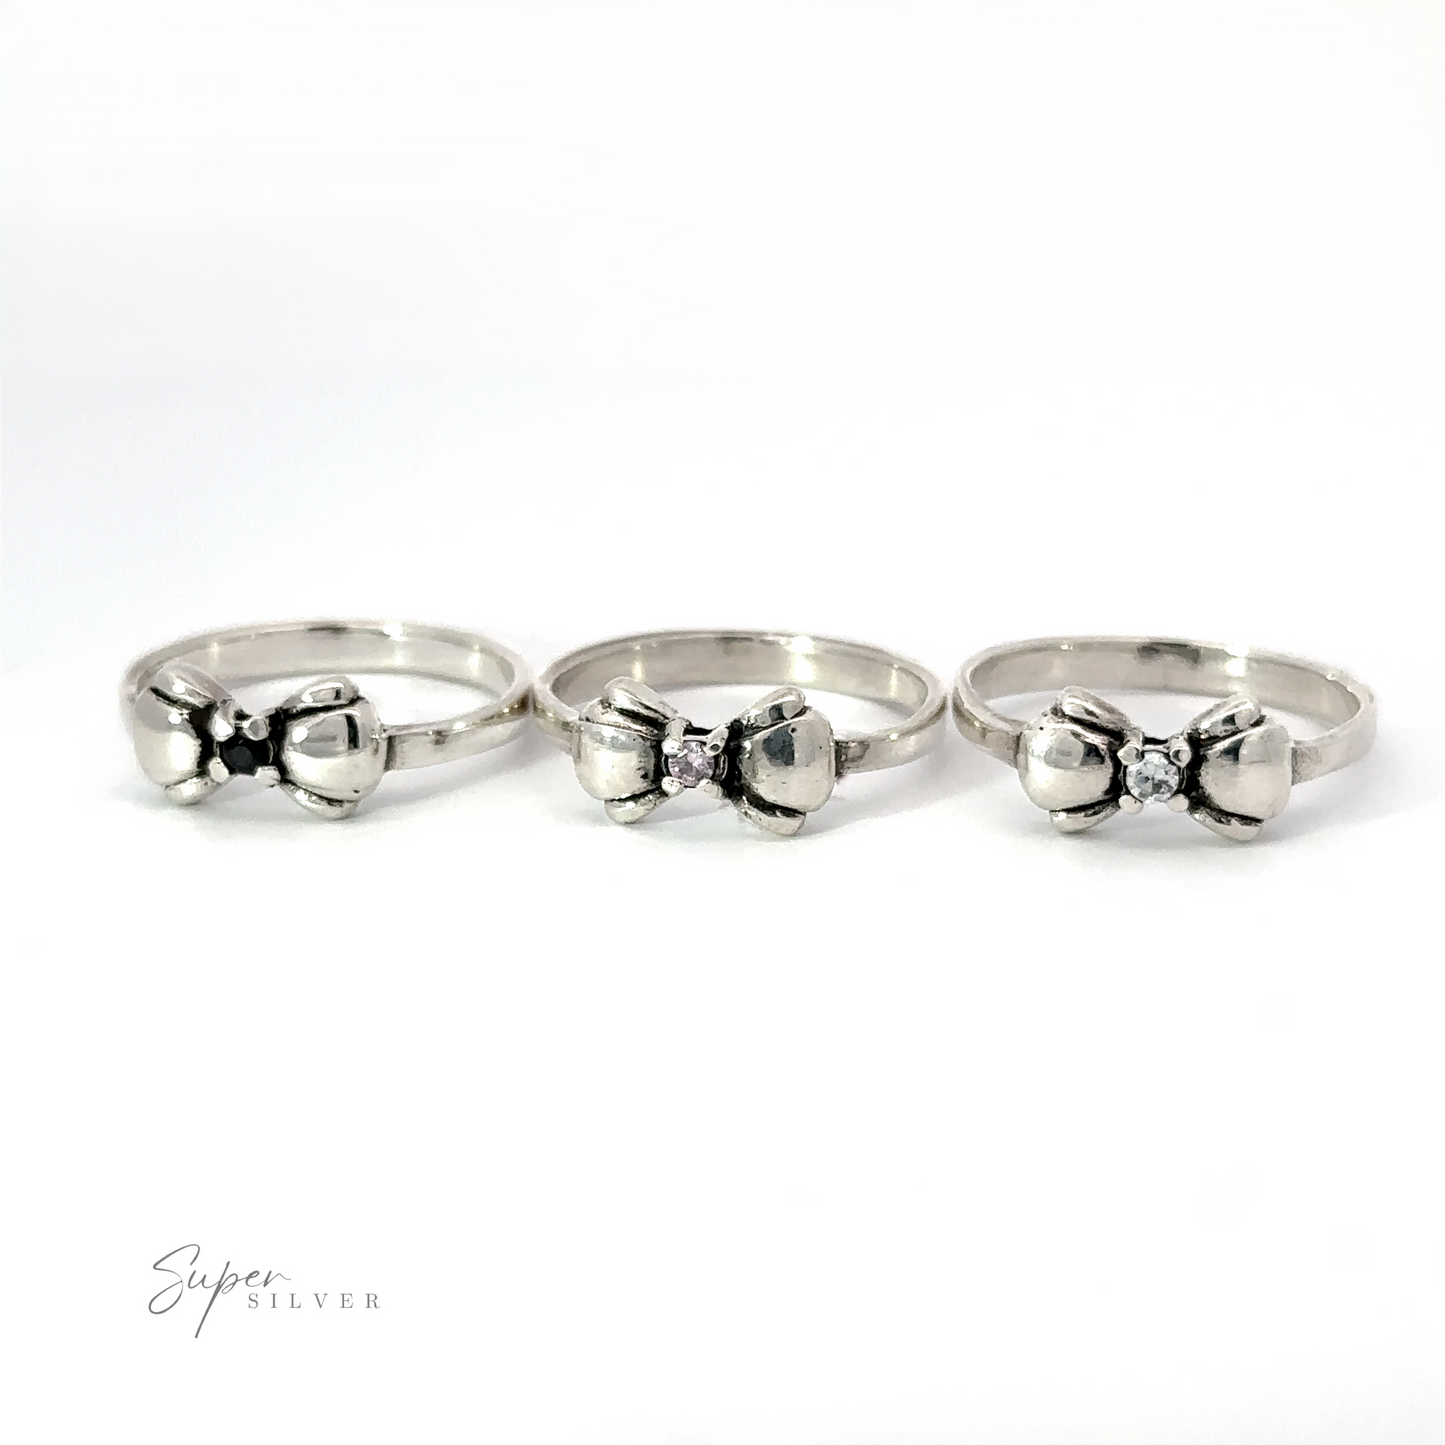 
                  
                    Three Adorable Cubic Zirconia Bow Rings with bow-shaped designs and small central gemstones are lined up against a white background. One features a striking black cubic zirconia. The text "Super Silver" is visible in the lower left corner.
                  
                